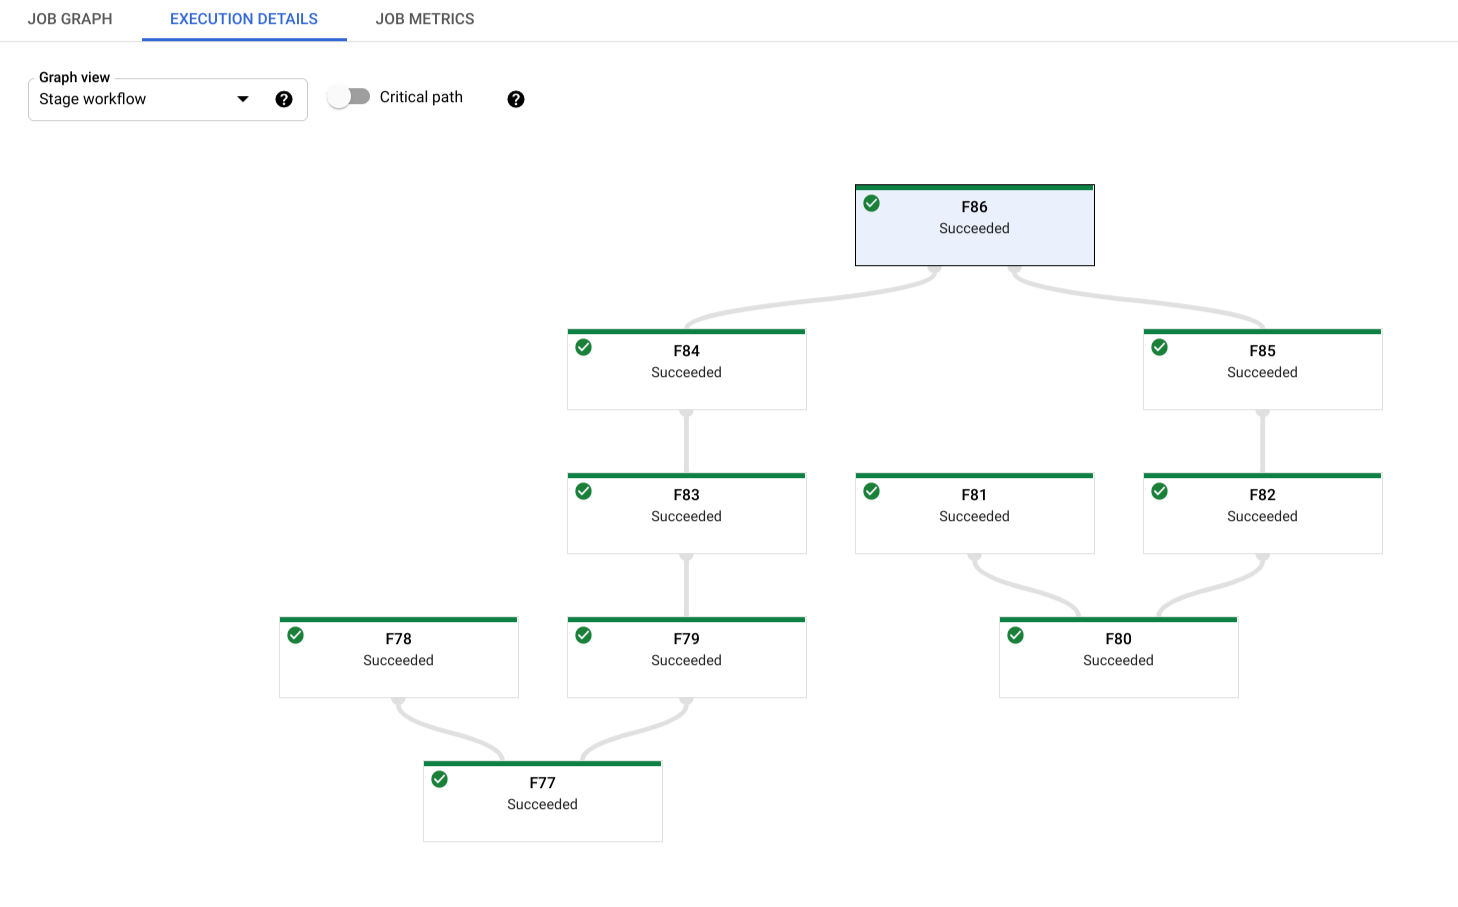 An example of the Stage workflow view, showing the hierarchy of the different
execution stages of a job.